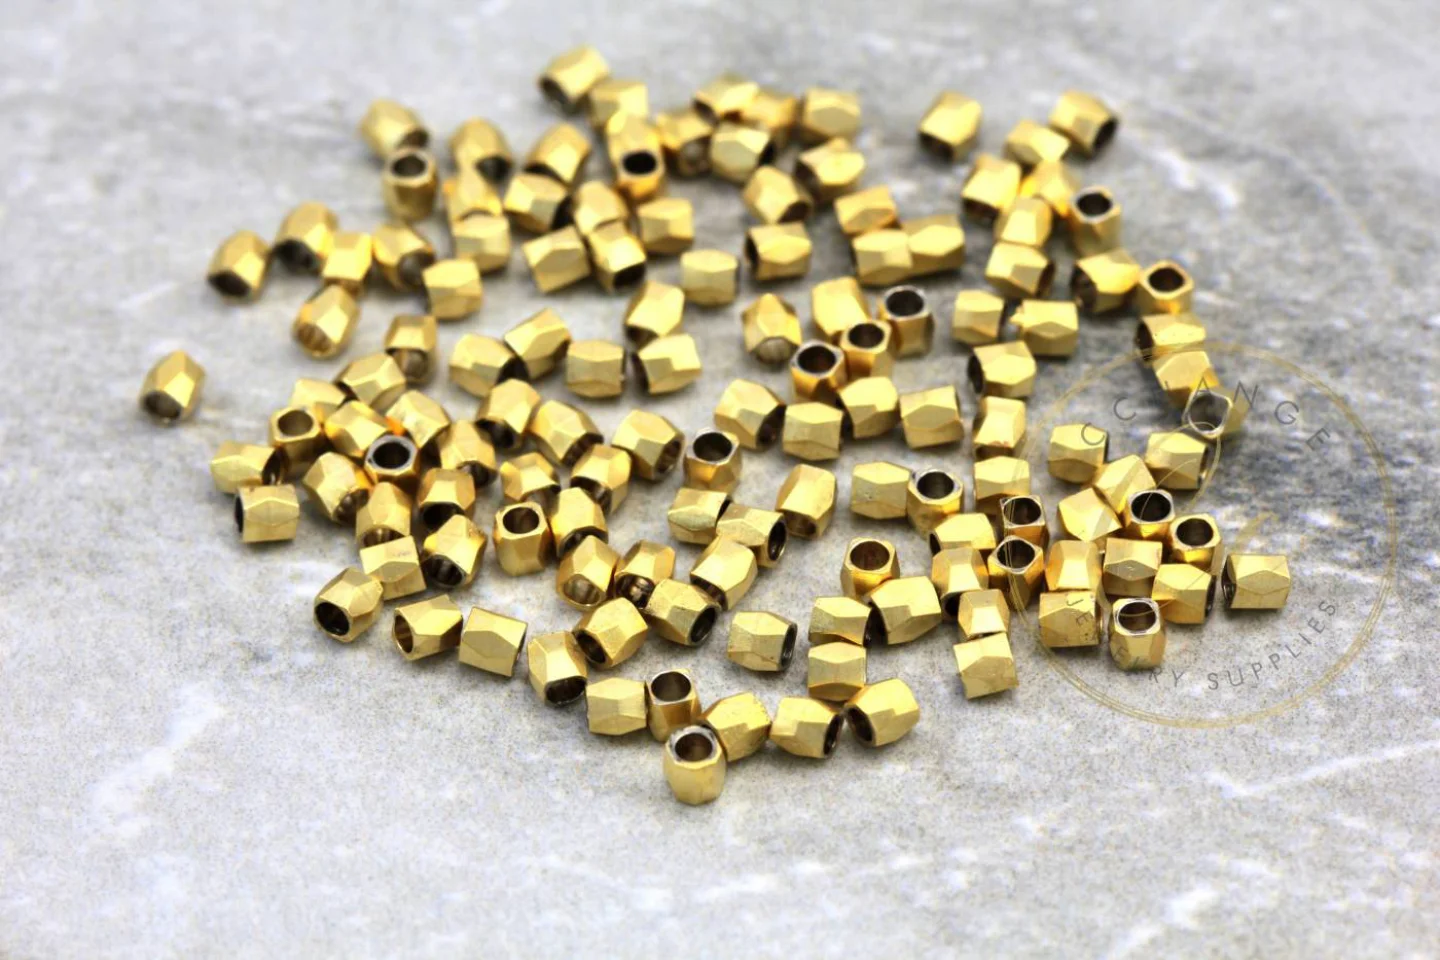 2mm-mini-brass-spacer-bead-findings.